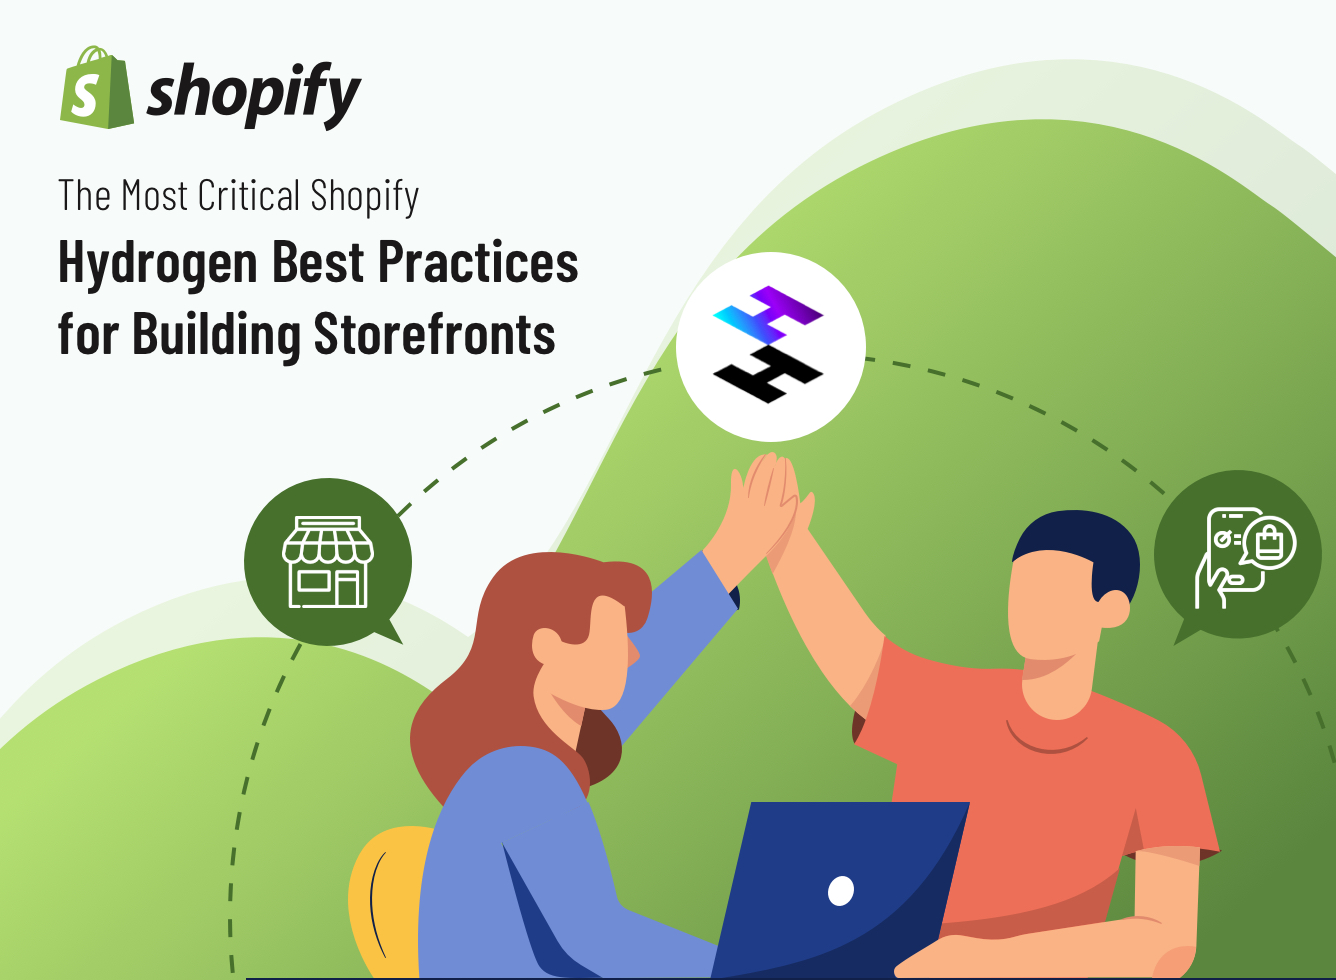 The Most Critical Shopify Hydrogen Best Practices for Building Storefronts